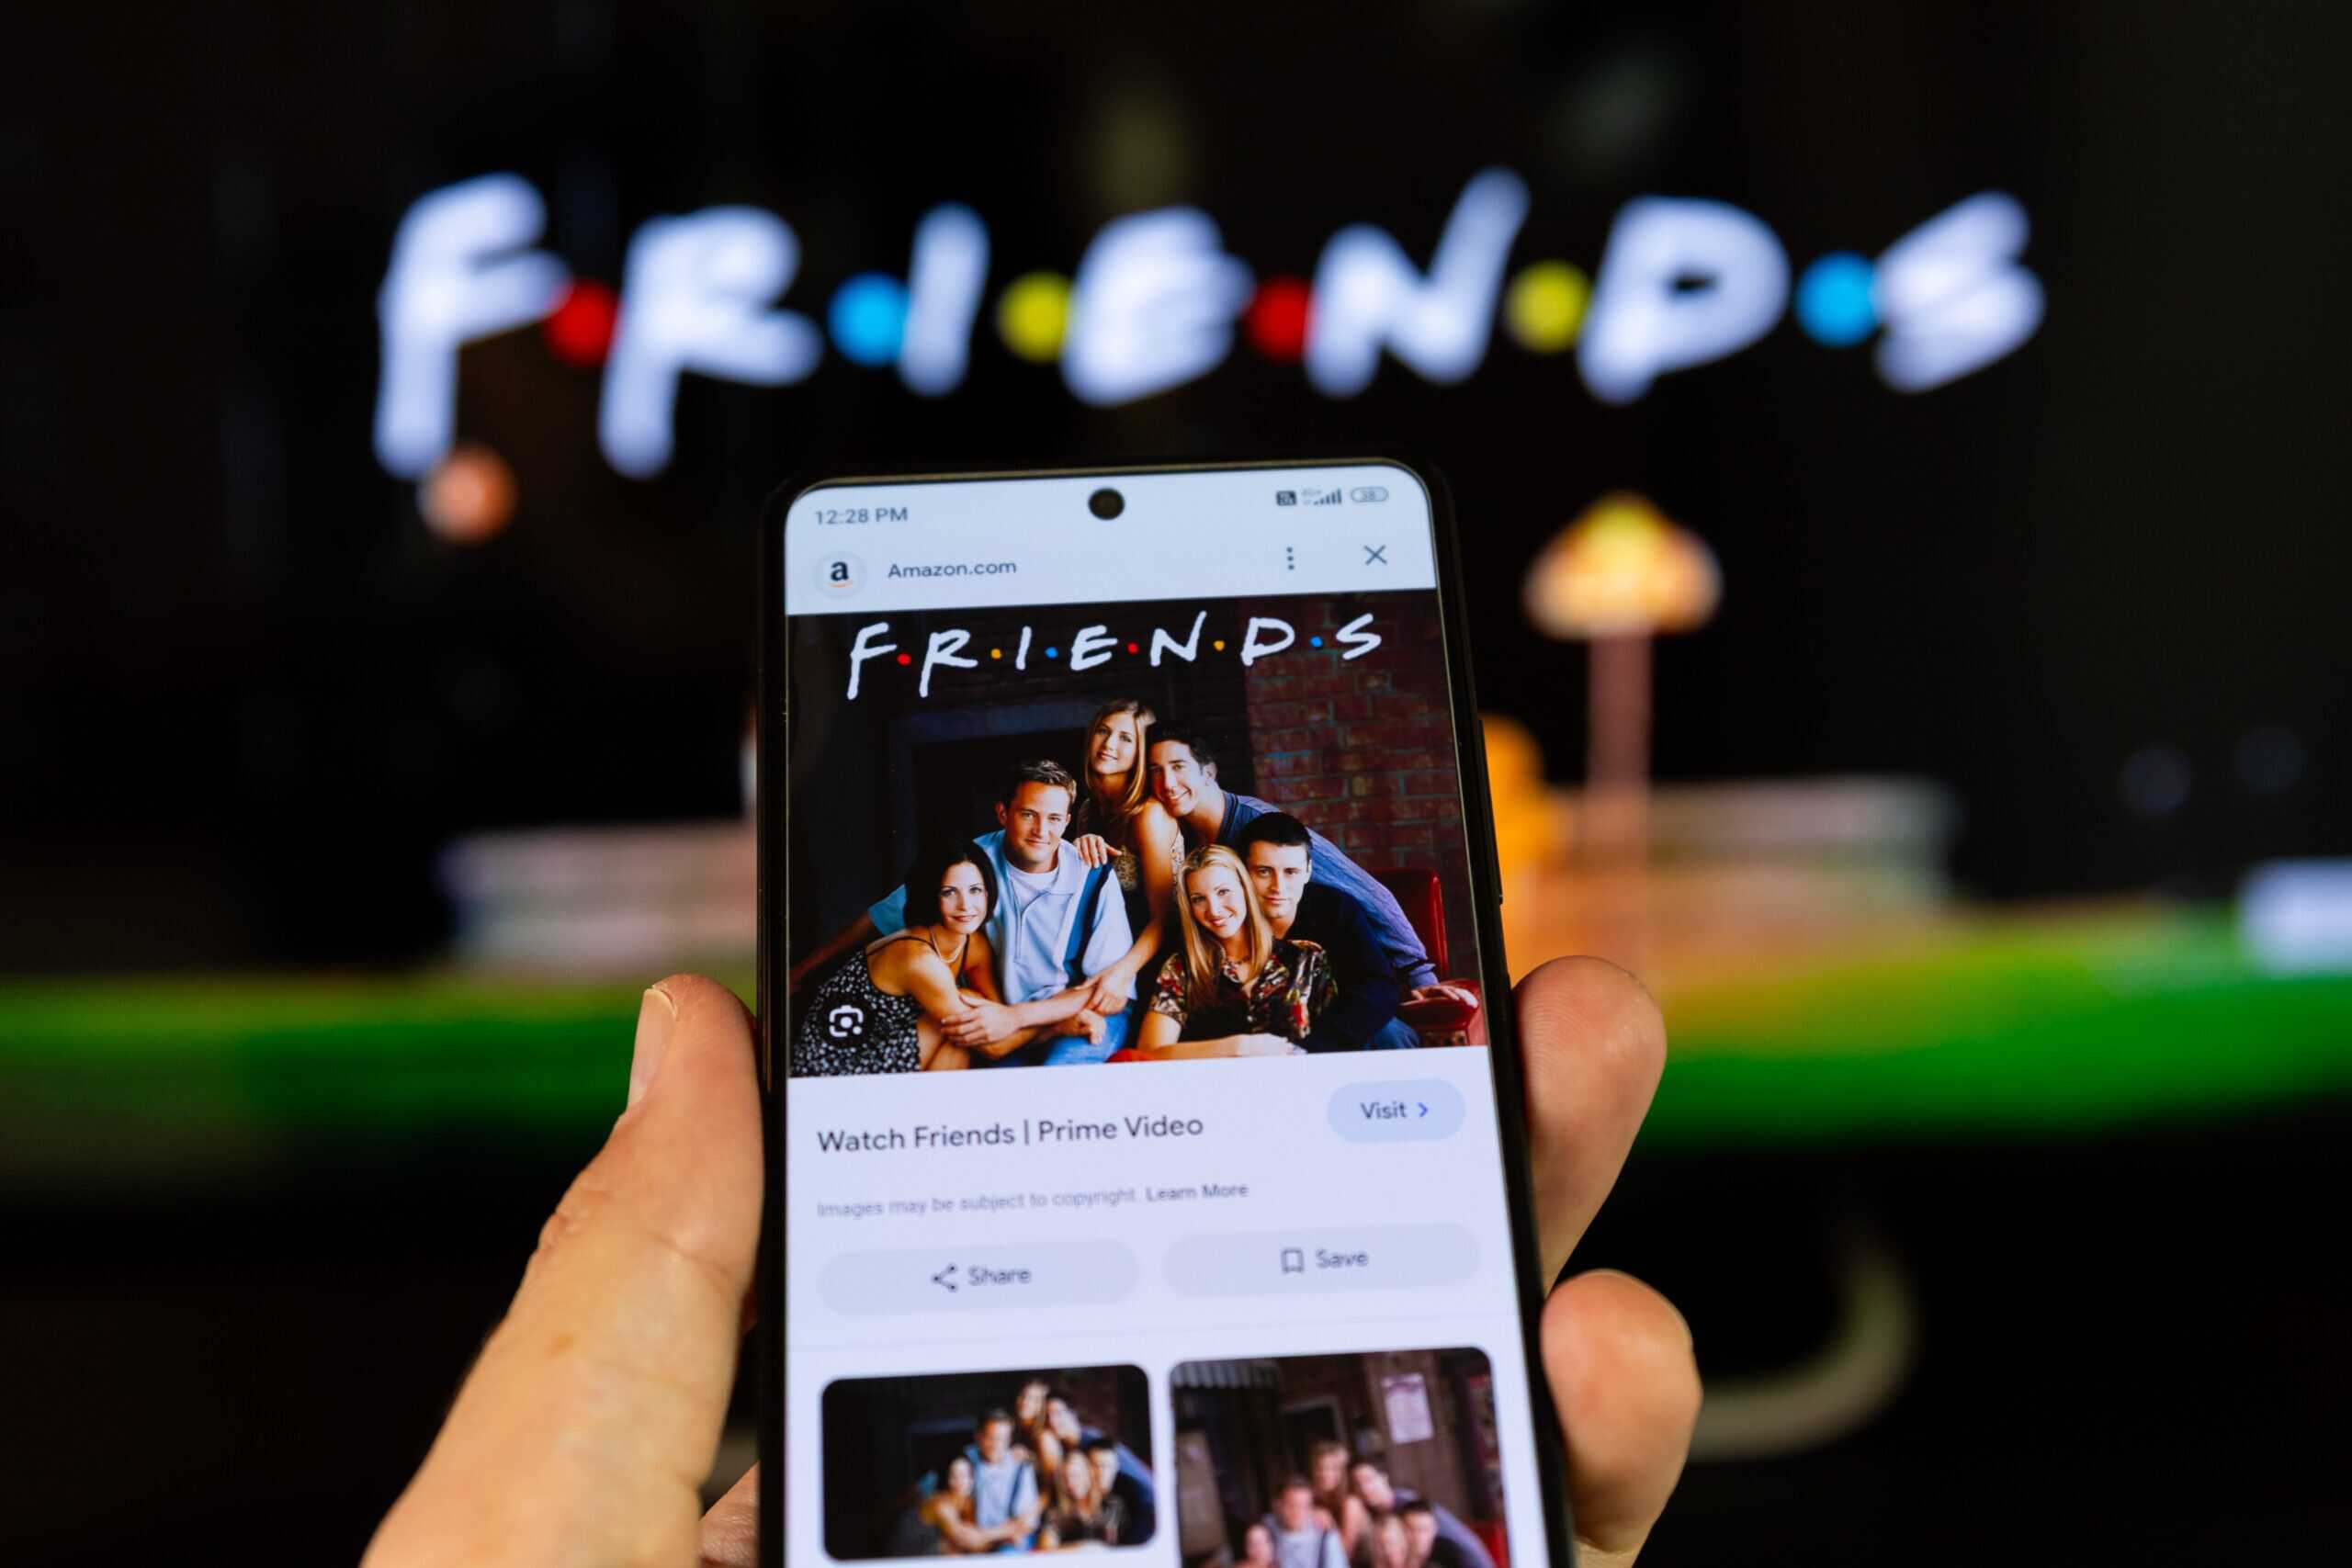 <p>One of the most iconic shows of the 90s was “Friends” starring Jennifer Aniston, David, Schwimmer, and the late Matthew Perry — just to name a few. “Friends” isn’t the only popular TV show or movie to be filmed in New York, though. “Gossip girl,” “Sex and the City,” “Law and Order” are some of the bigger TV shows to take into account.</p> <p>“Autumn in New York,” “Uptown Girls,” and “Black Swan” are some highly-rated films that used New York as a backdrop. <a href="https://247tempo.com/meet-the-10-biggest-movie-stars-from-new-york/?utm_source=msn&utm_medium=referral&utm_campaign=msn&utm_content=meet-the-10-biggest-movie-stars-from-new-york&wsrlui=47227752" rel="noopener">Click here to read about the 10 biggest movie stars who were born in New York.</a></p>